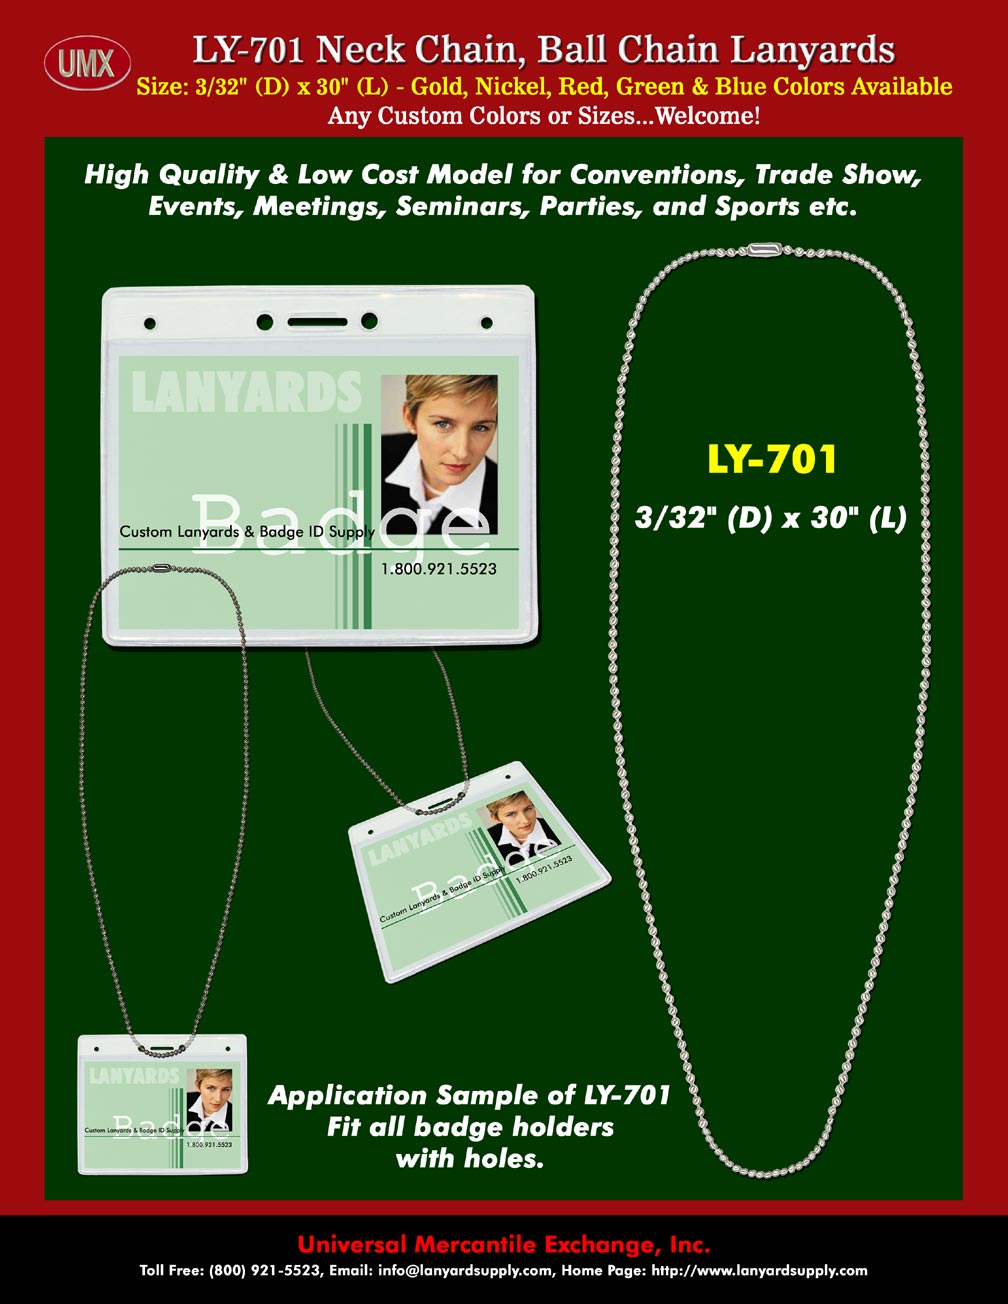 UMX Ball Chain and Neck Chain Lanyards Supply For Conventions, Events, Meetings or